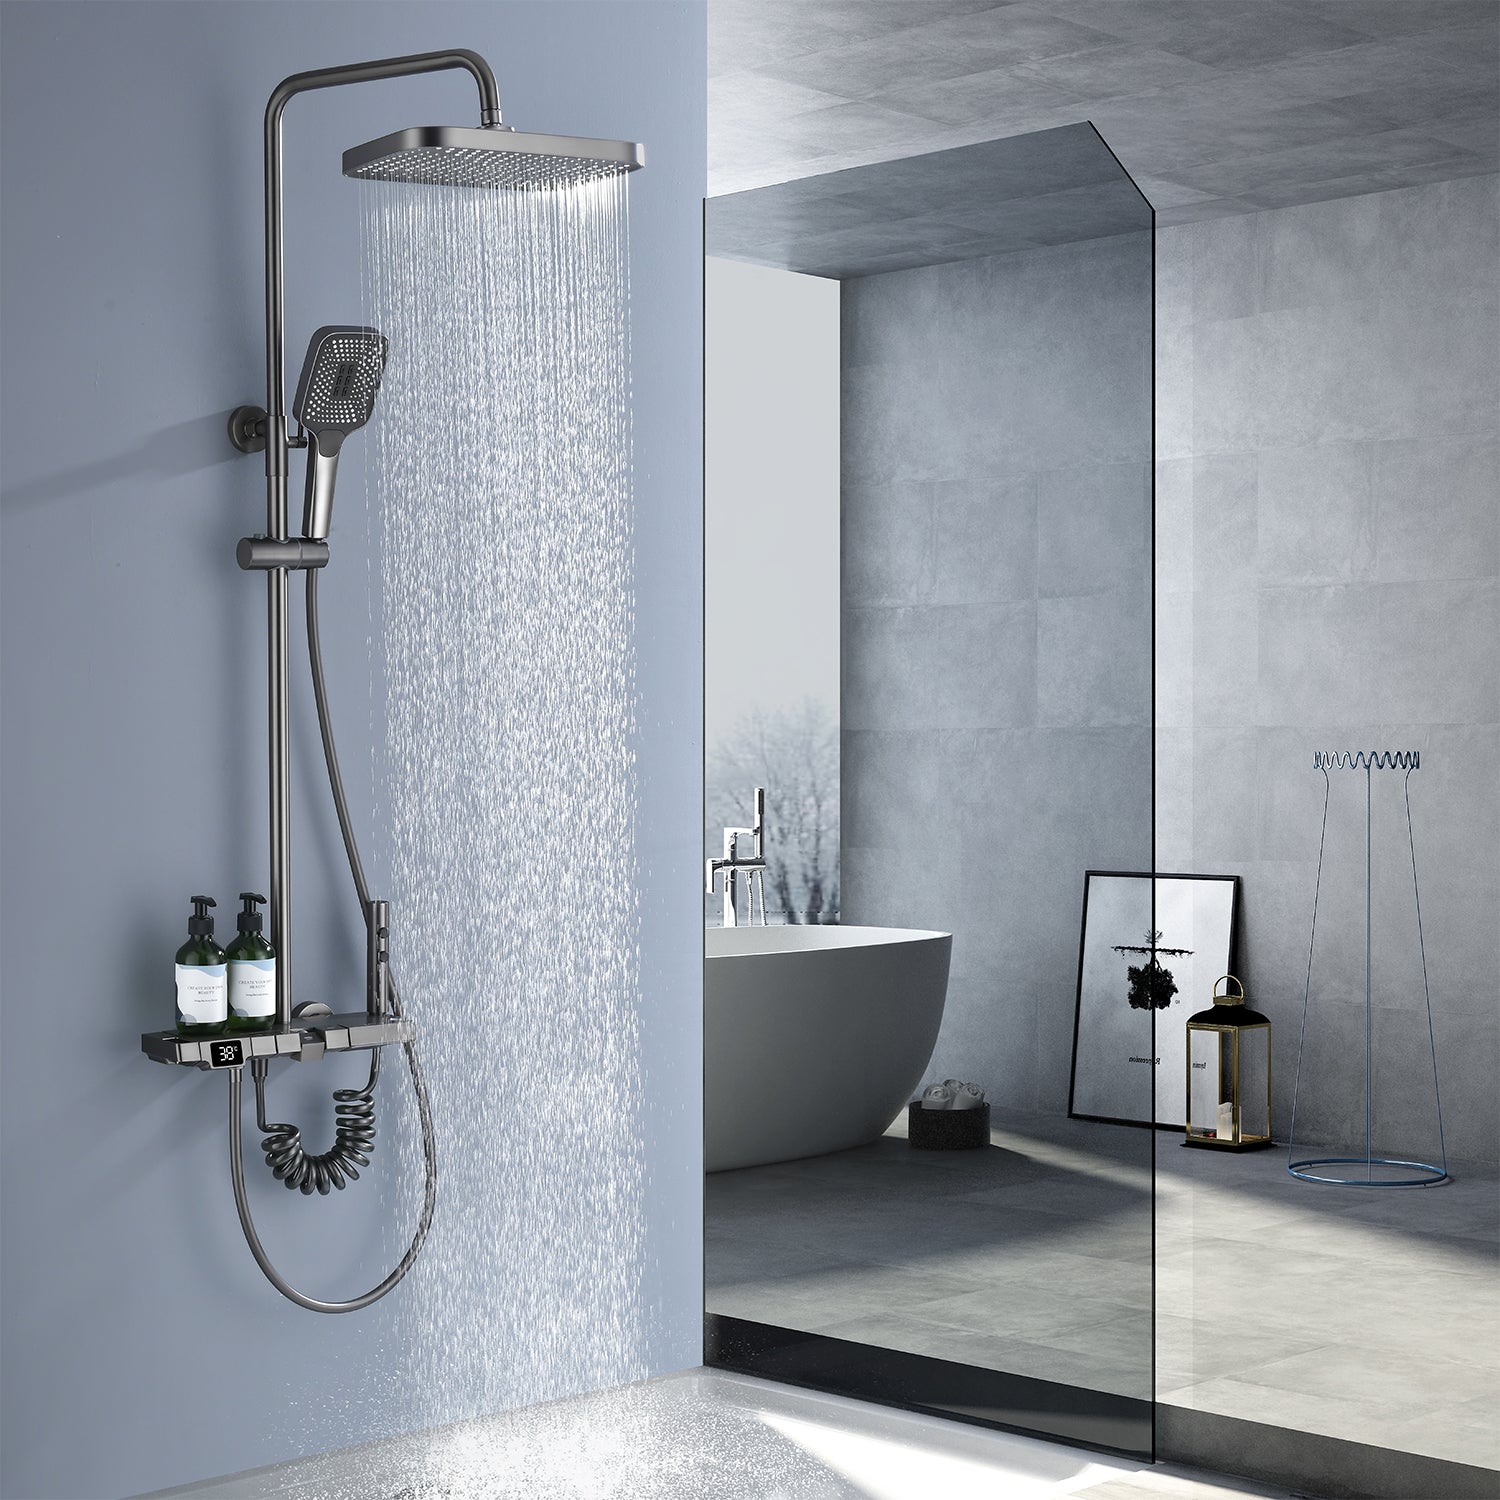 Lefton Thermostatic Shower System with Temperature Display and 4 Water Outlet Modes-SST2203